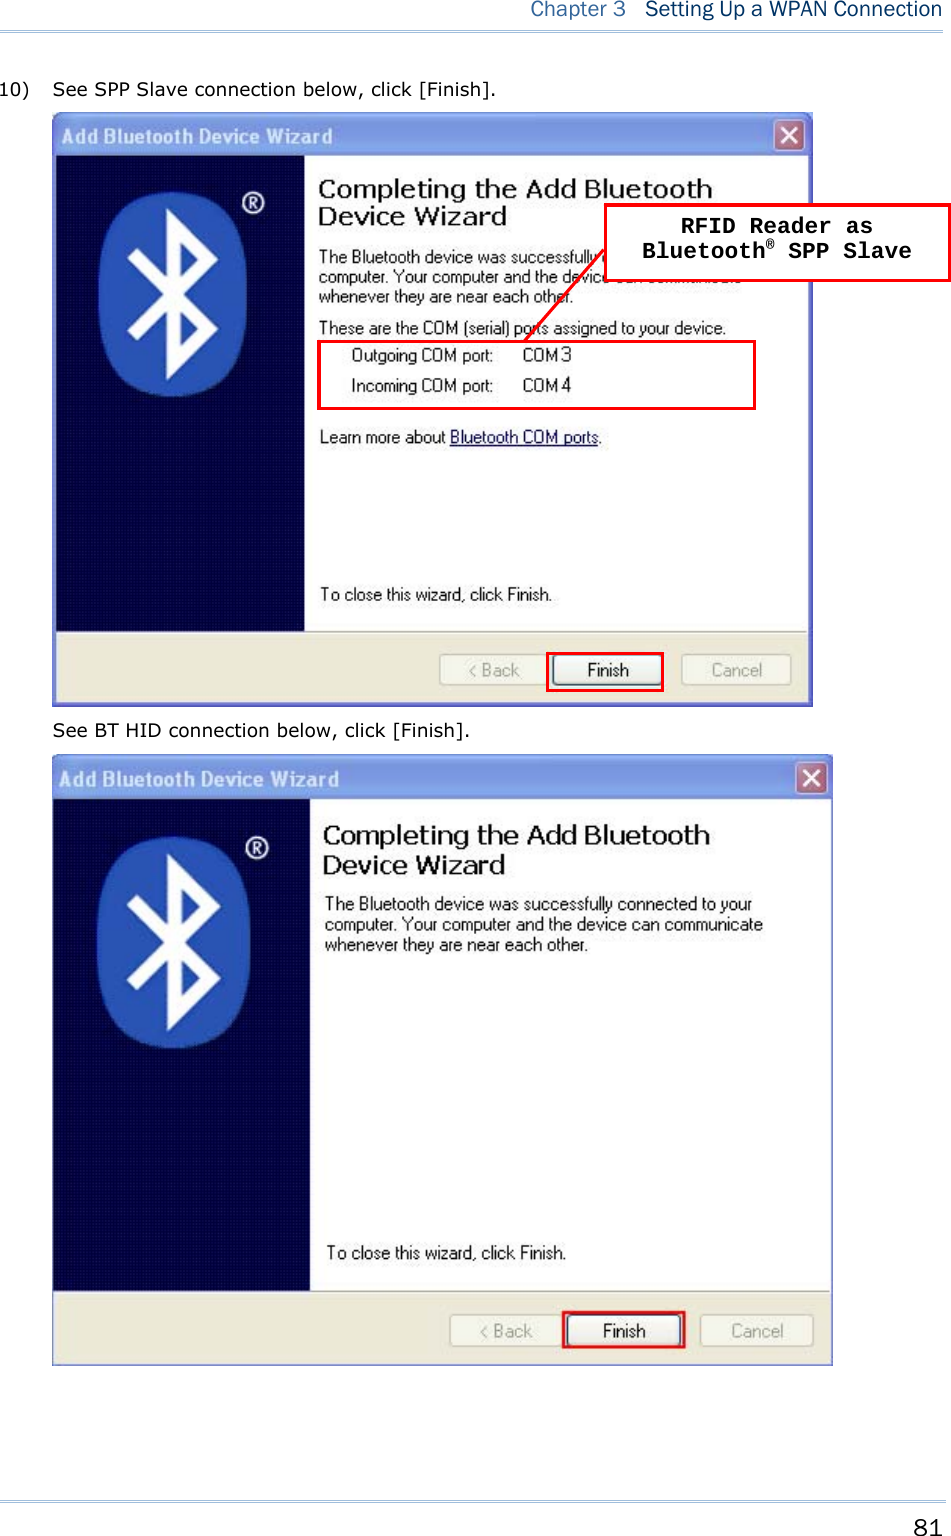     81  Chapter 3  Setting Up a WPAN Connection  10)  See SPP Slave connection below, click [Finish].  See BT HID connection below, click [Finish].    RFID Reader as Bluetooth® SPP Slave 